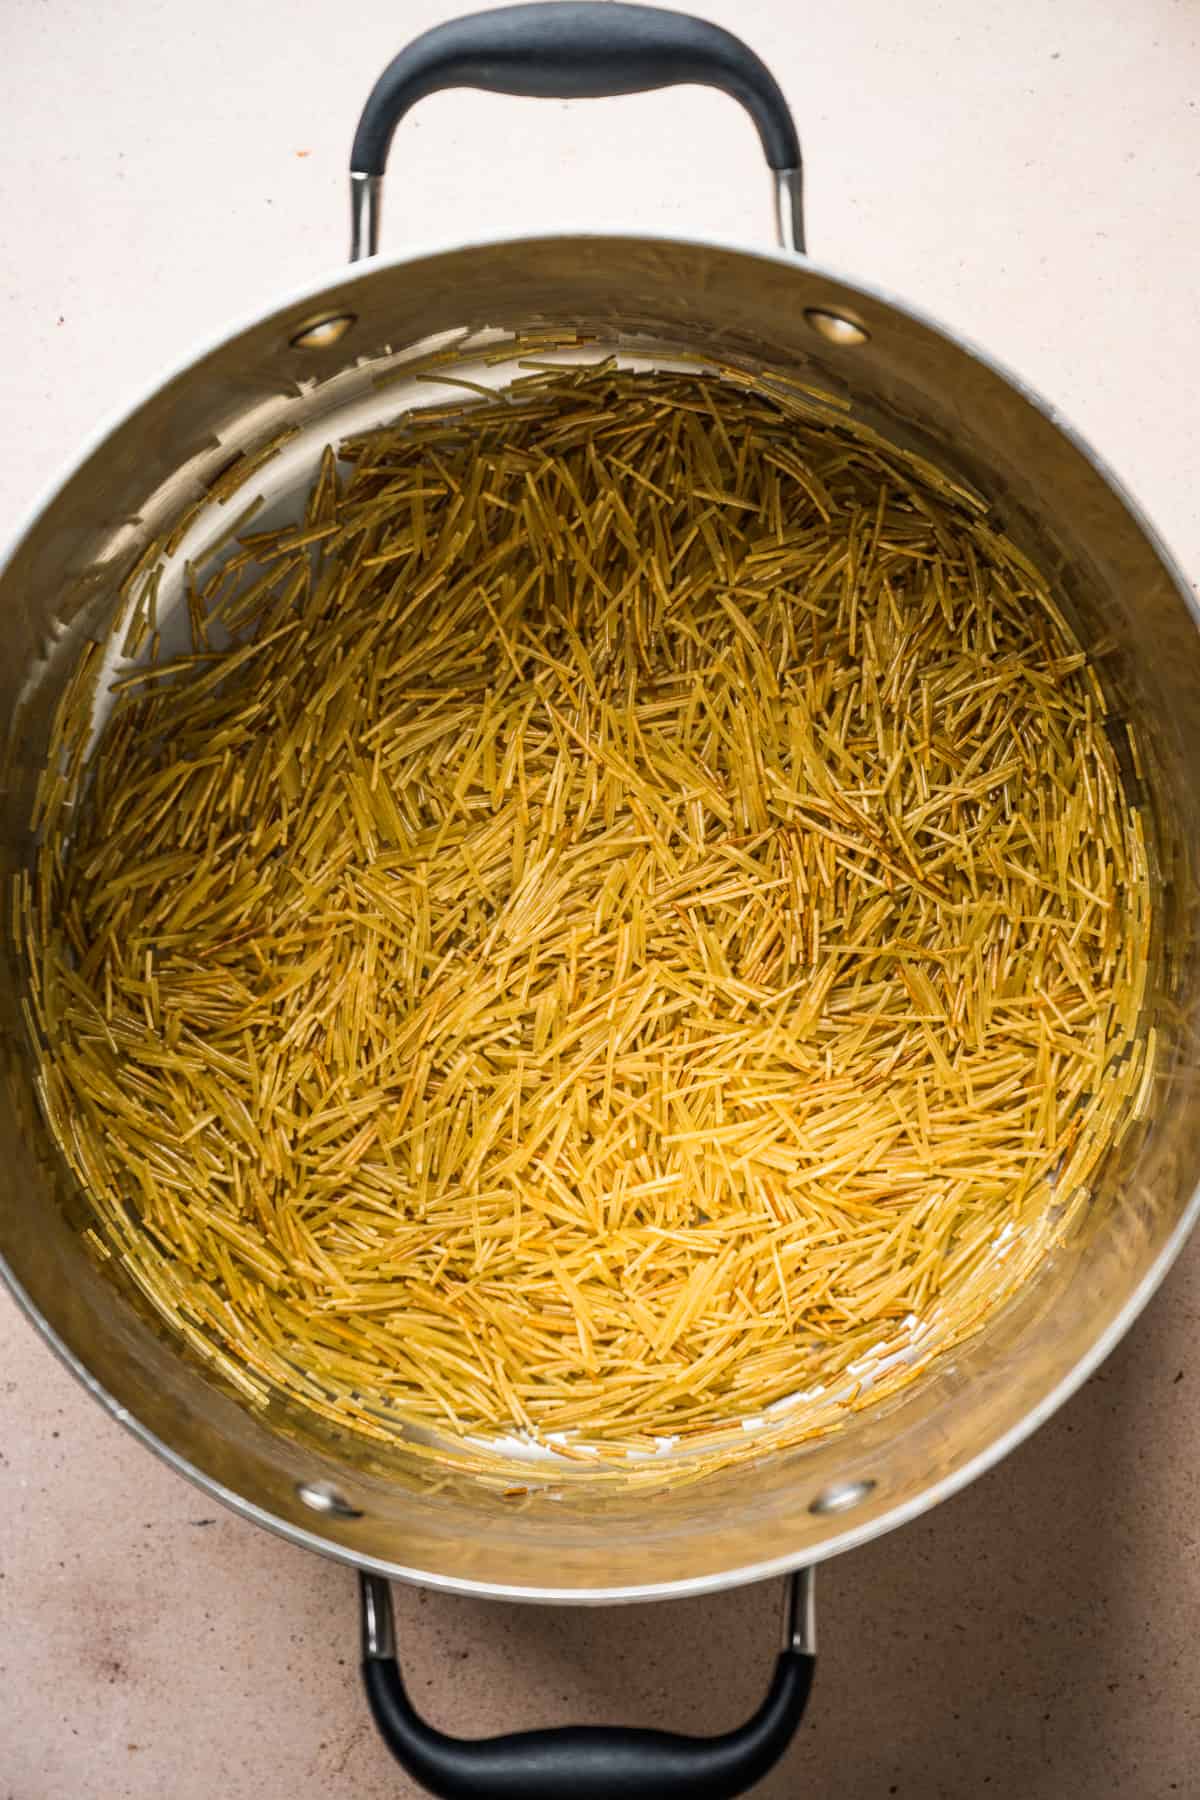 Toasted fideo noodles in a pot.